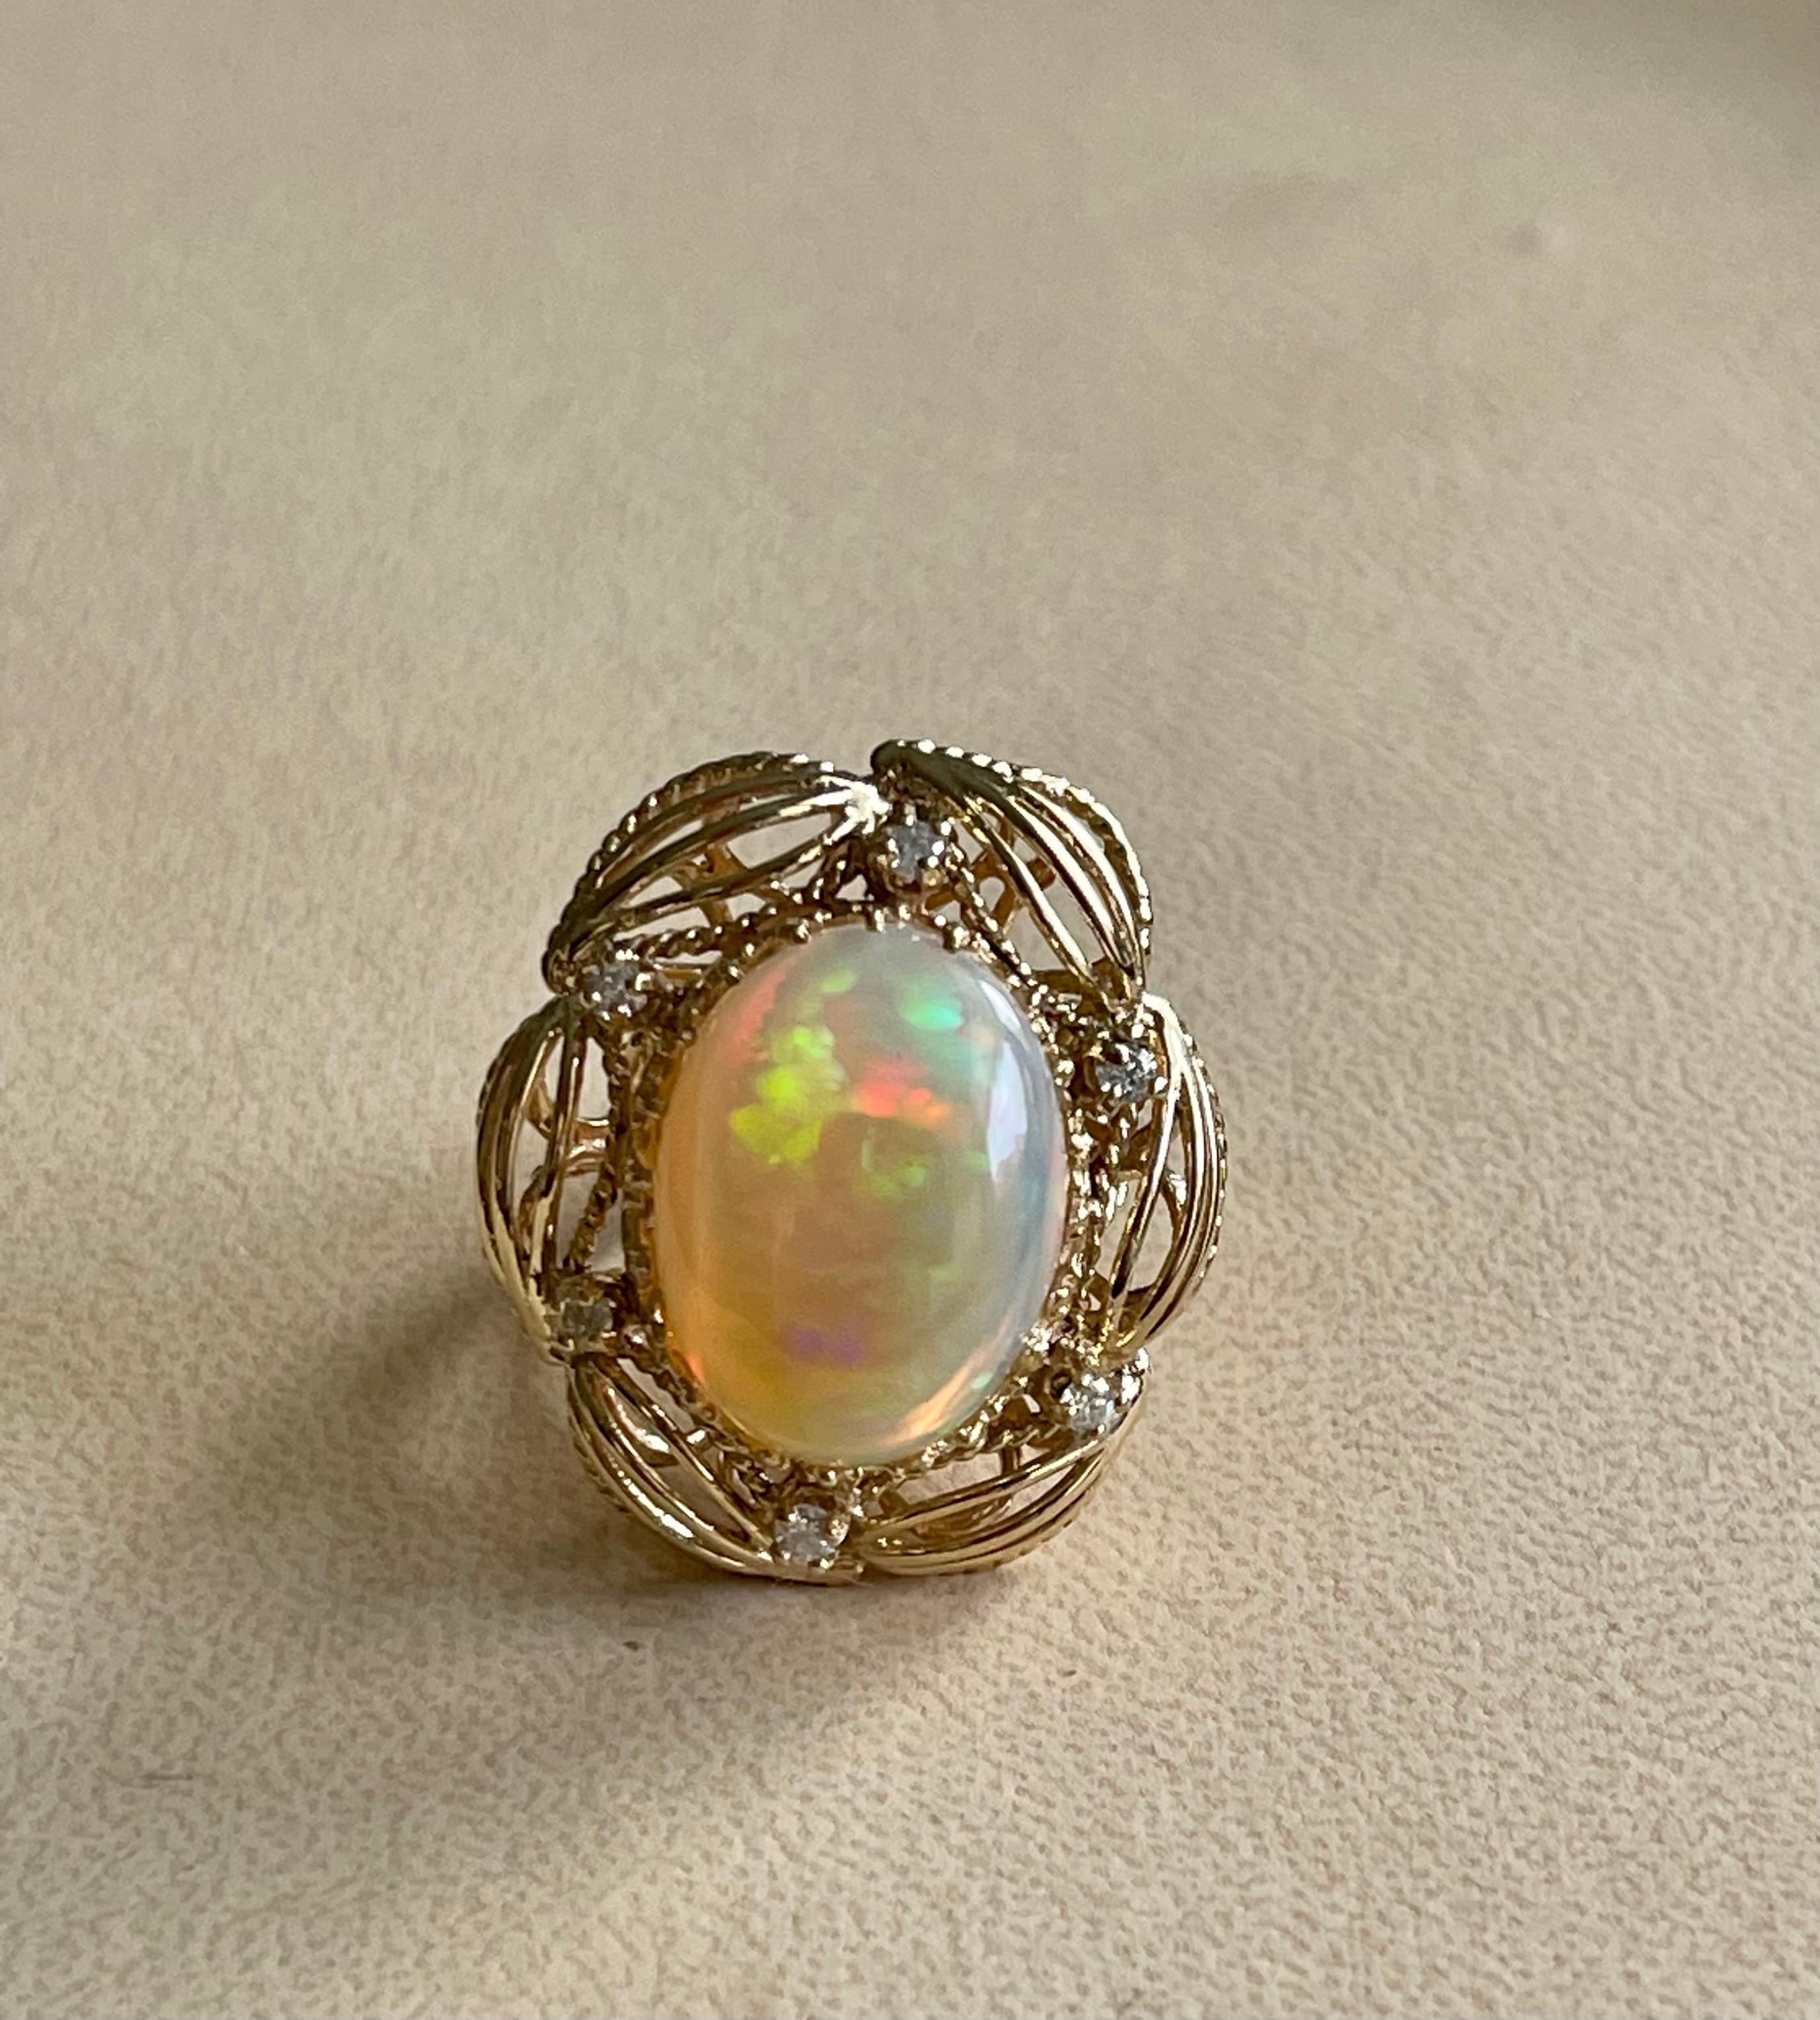 15 Carat Oval Shape Ethiopian Opal Cocktail Ring 14 Karat Yellow Gold Solid Ring 4